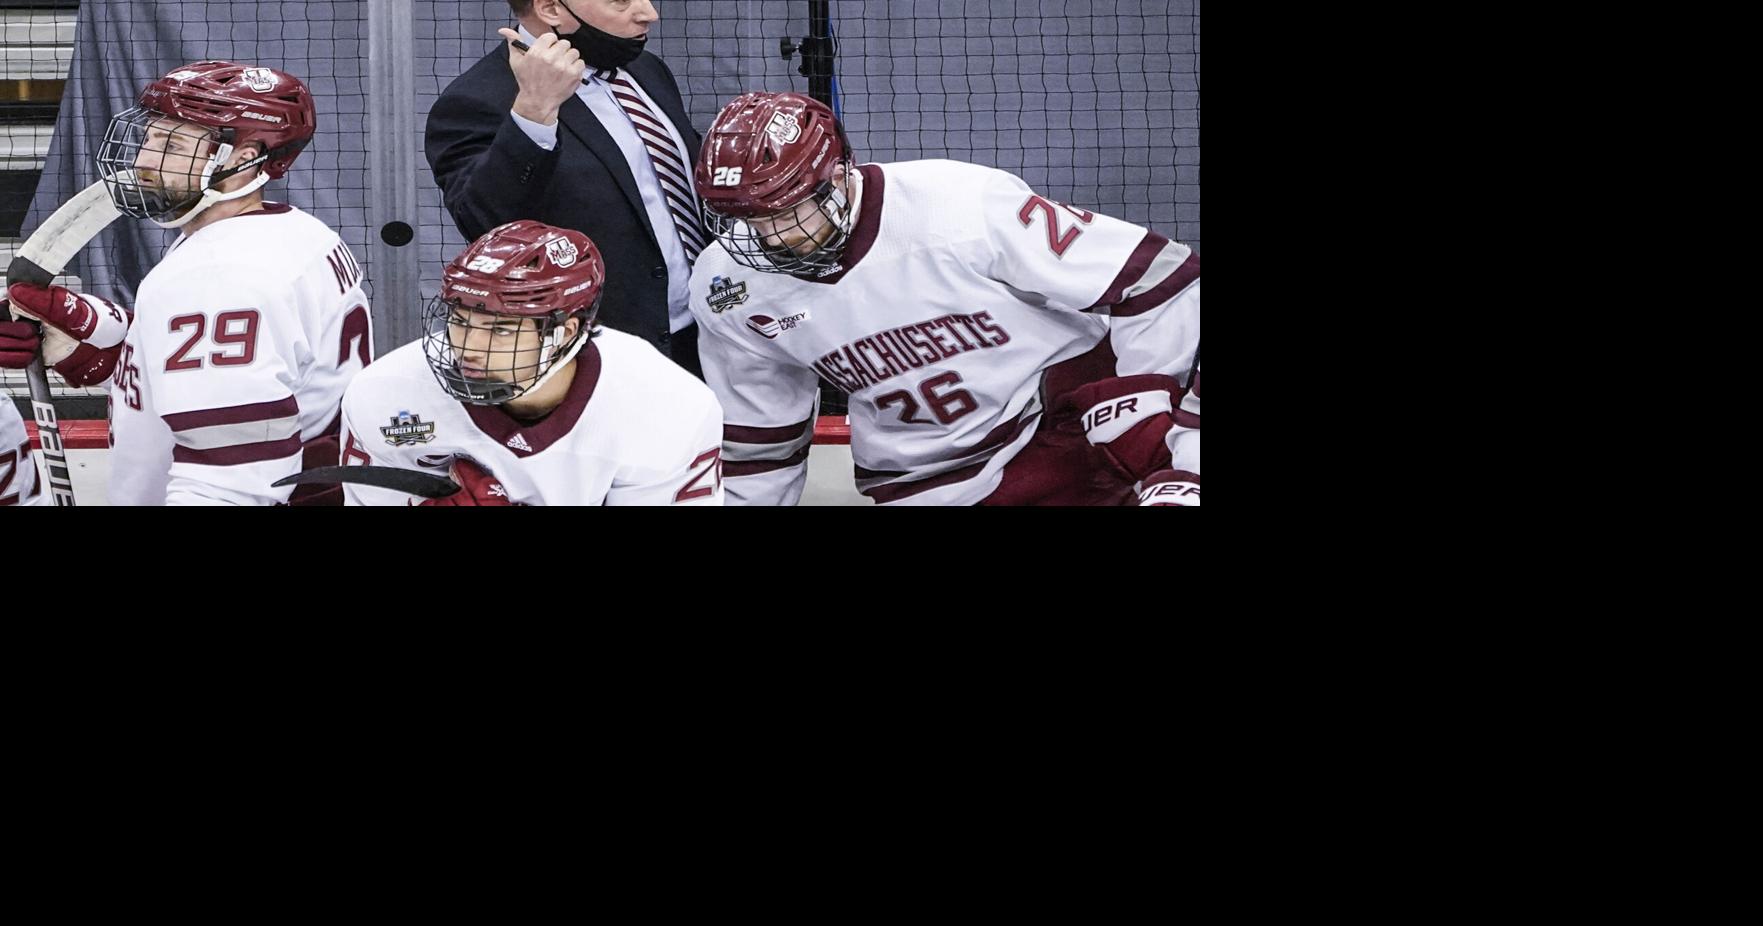 UMass extends contract for hockey coach Greg Carvel; ex-Eph Matt Lindsay  joins his staff | Local Sports 